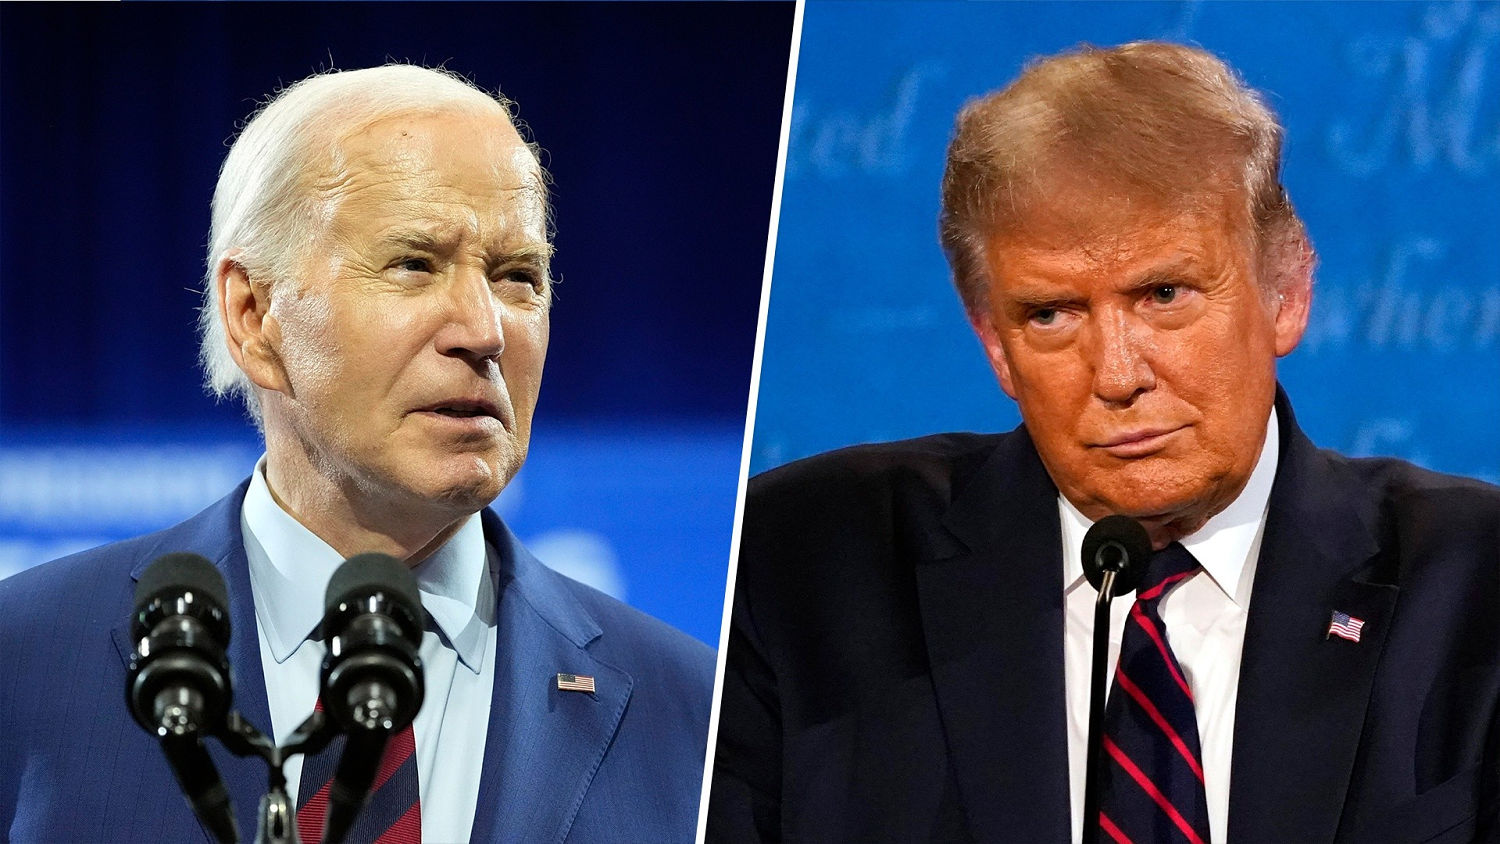 Biden and Trump agree to debate in June and September